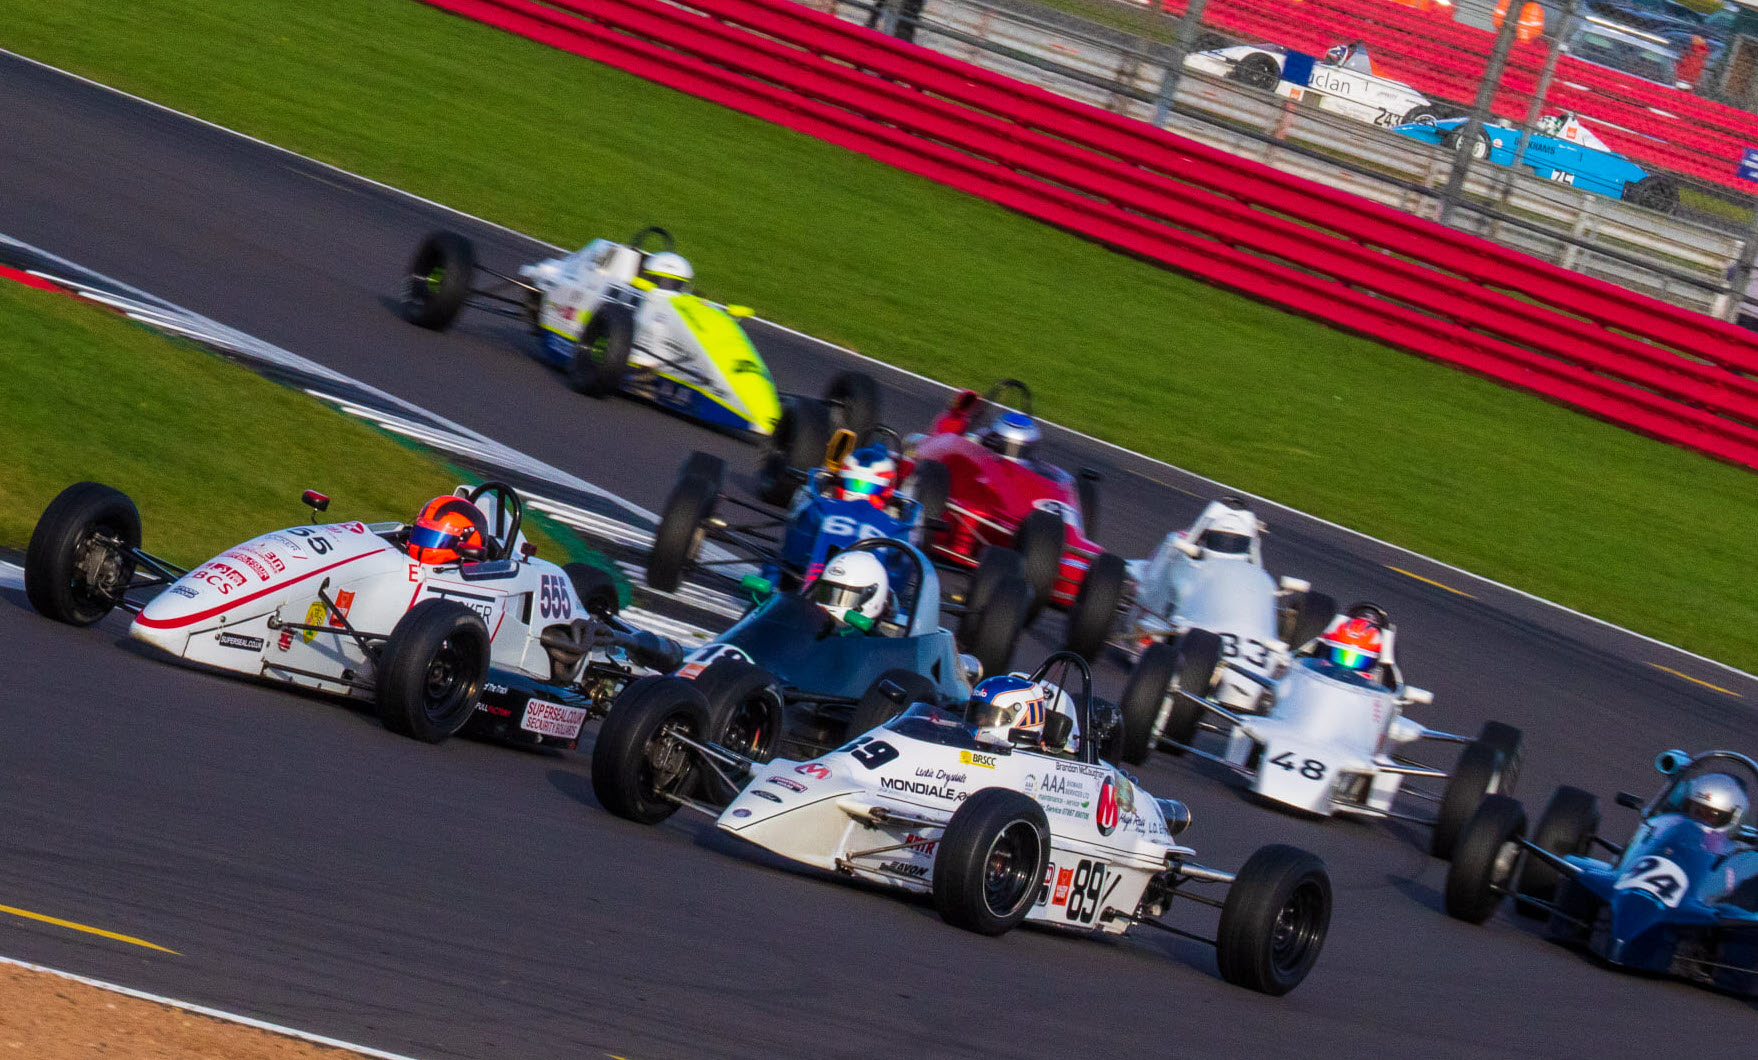 Historic Formula Ford racing at the HSCC Walter Hayes Trophy event at Silverstone